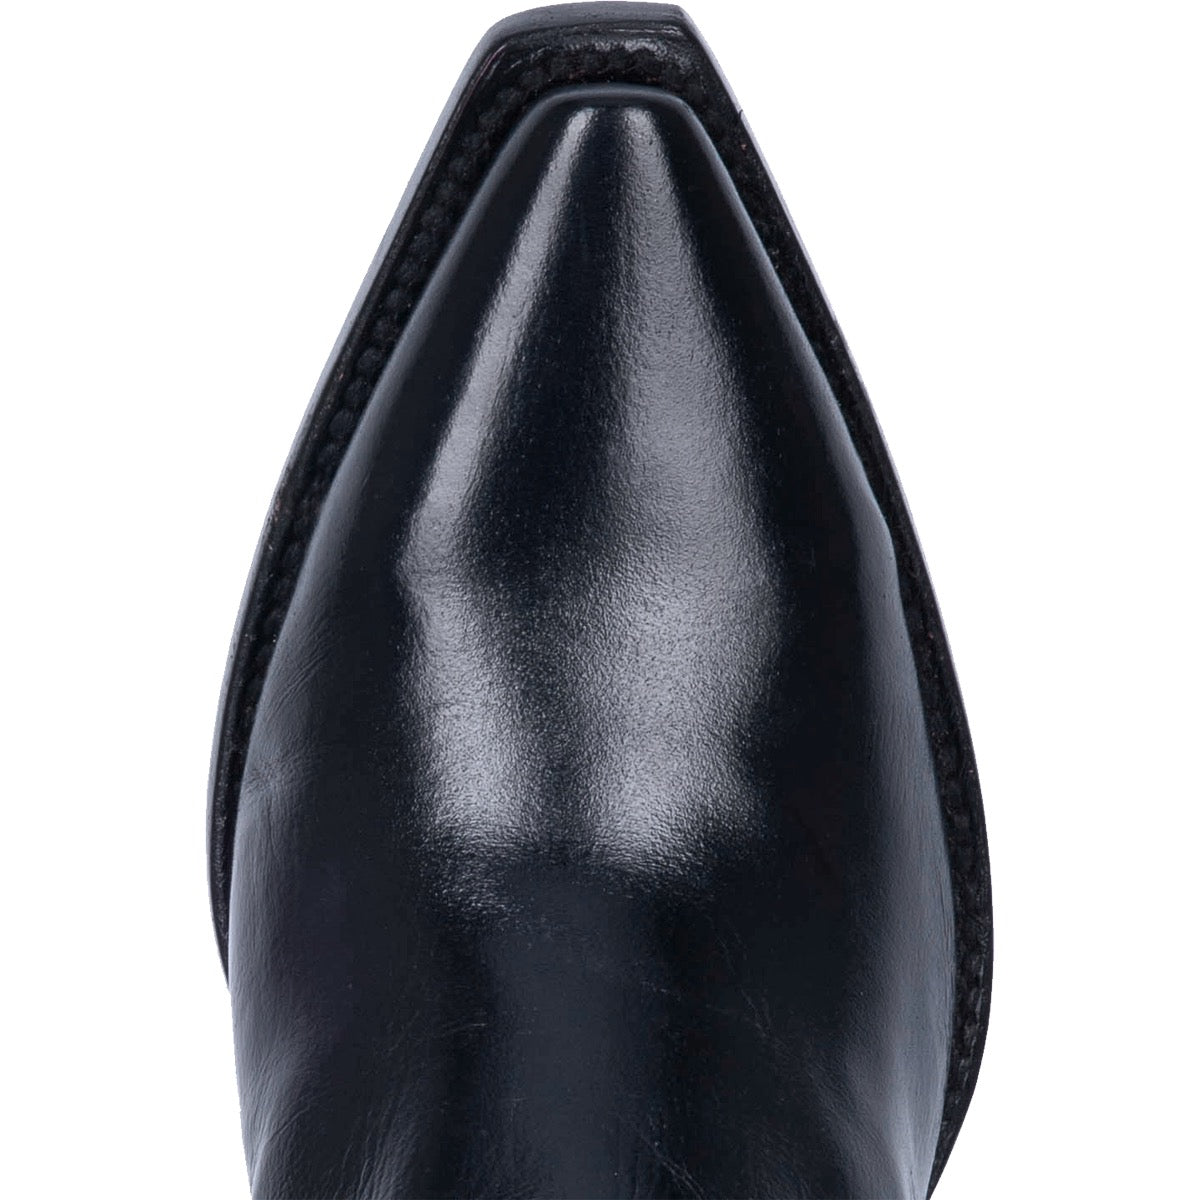 MARIA LEATHER BOOT Cover